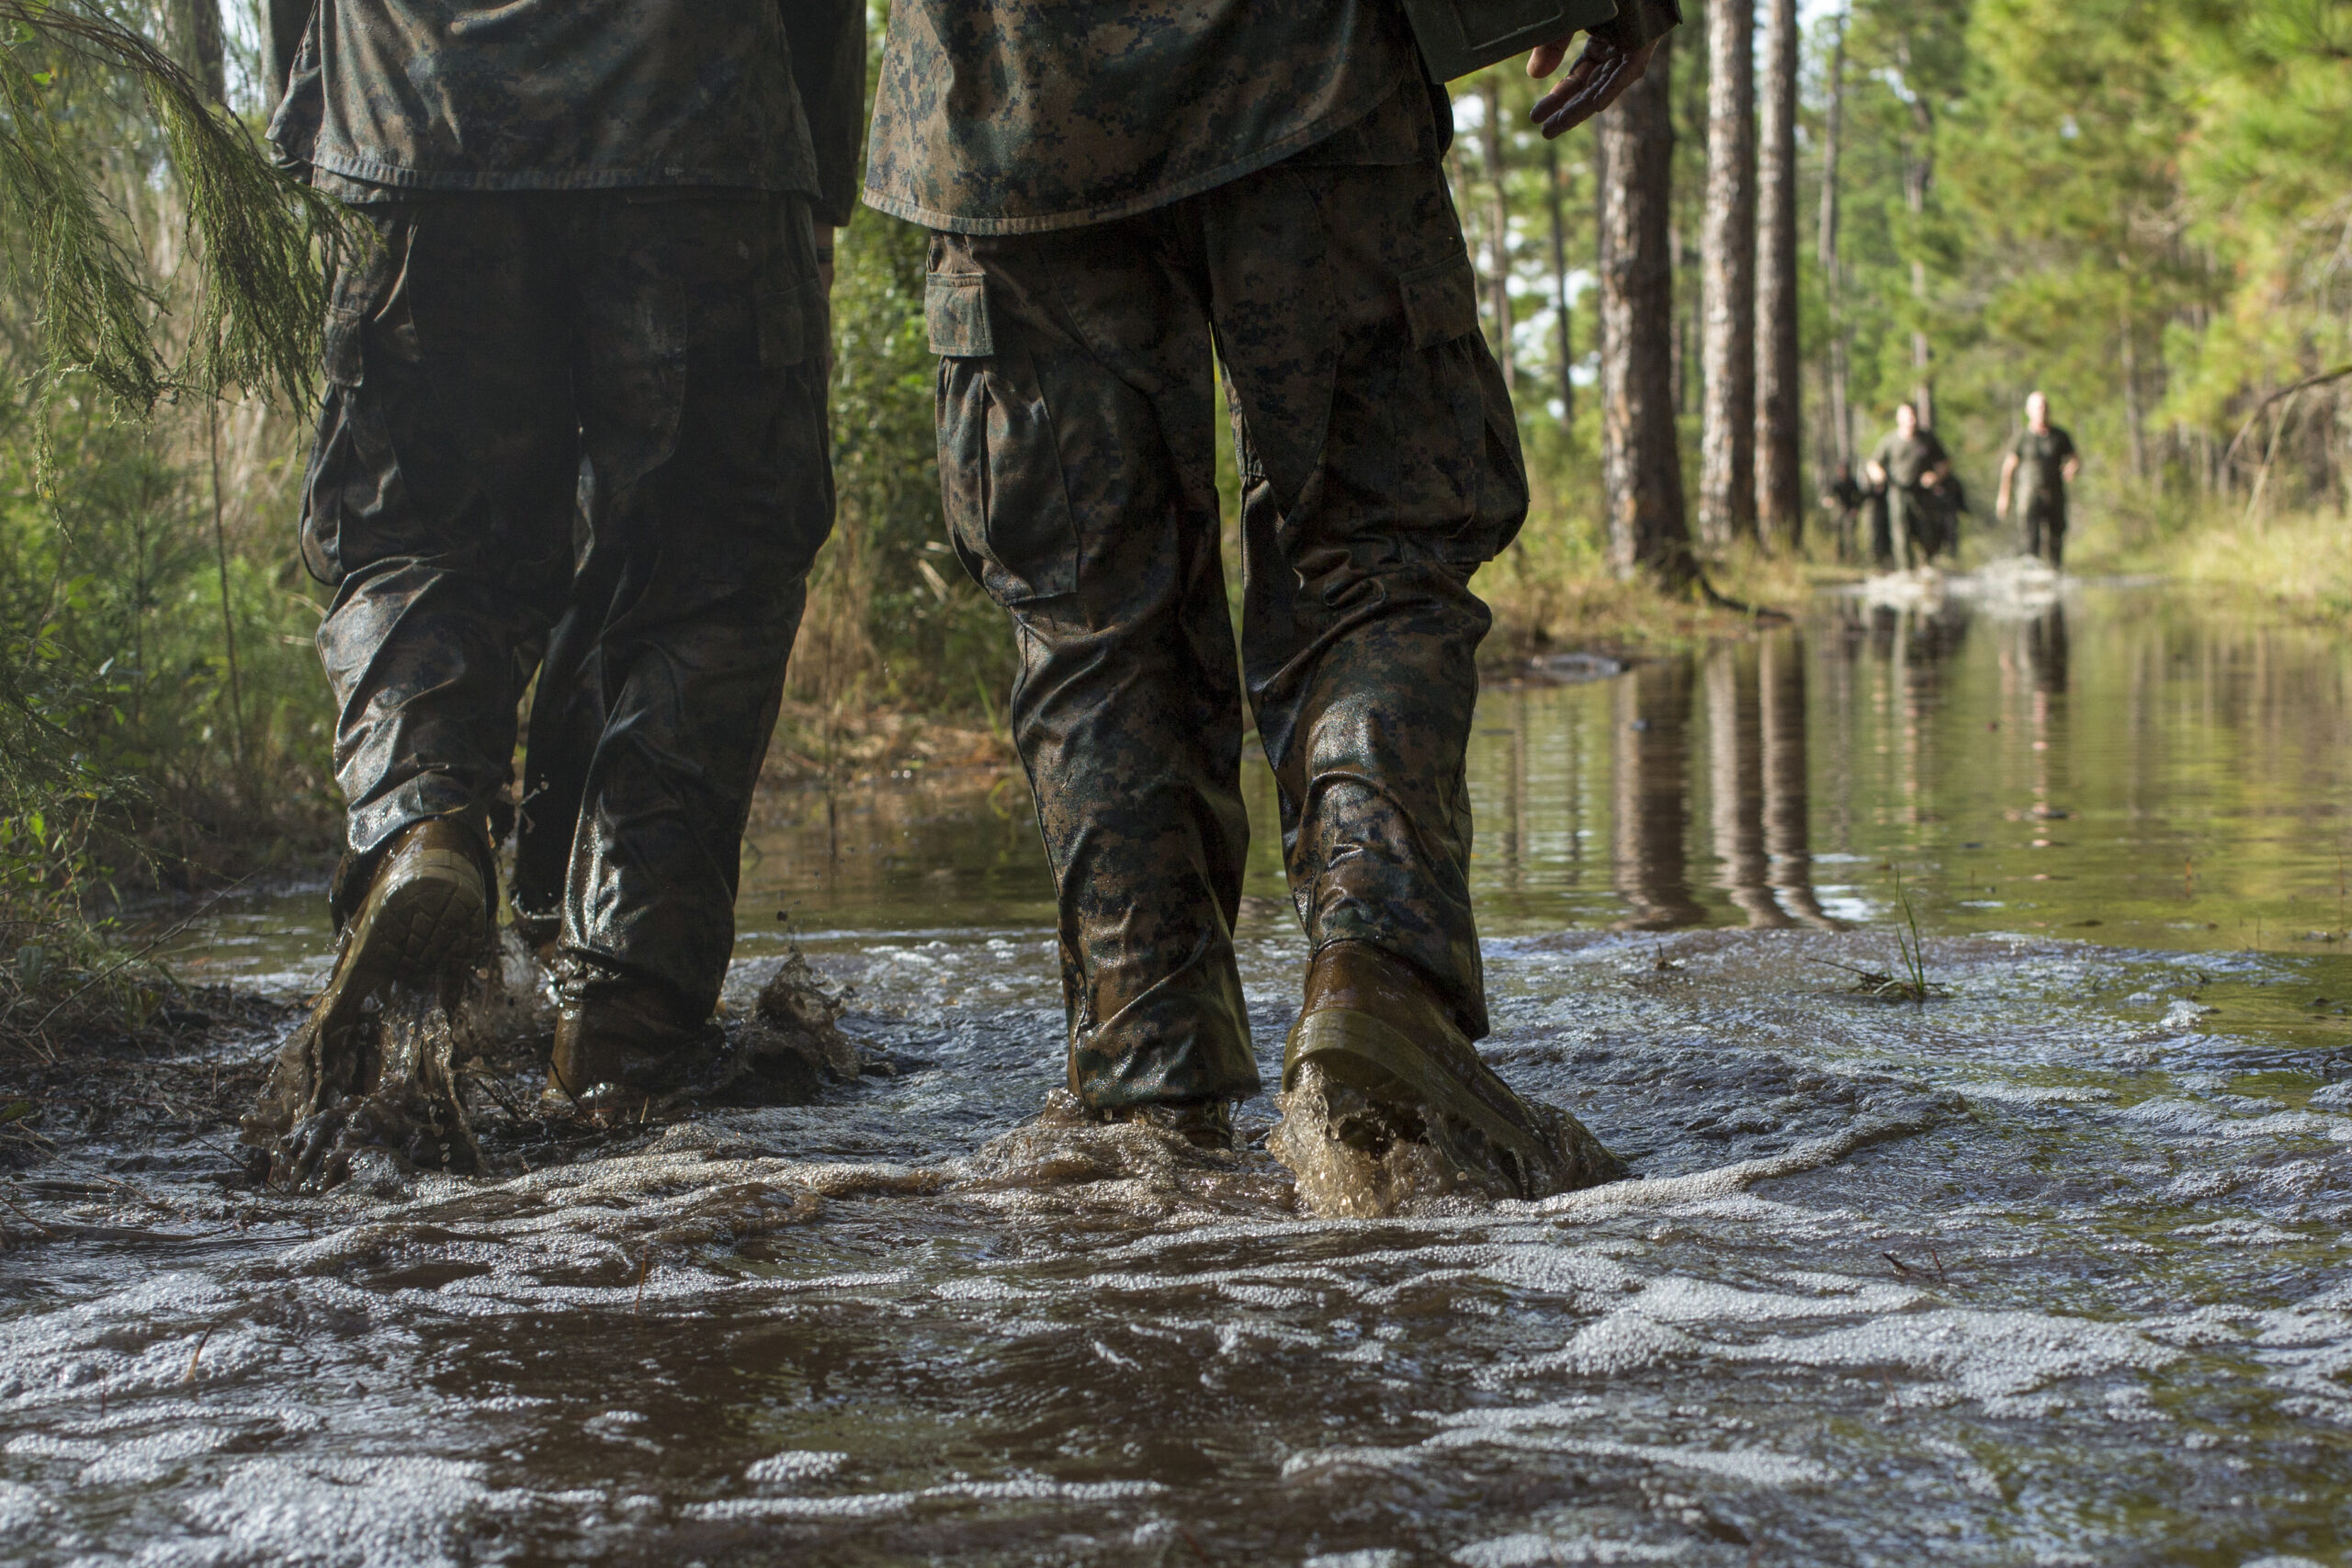 U.S. Marines with Headquarters and Service Battalion, Marine Corps Recruit Depot Parris Island, run through water during the annual Swamp Romp aboard Marine Corps Recruit Depot Parris Island, S.C., Nov. 4, 2015. The 4.6 mile Swamp Romp is a race consisting of teams of four who volunteered to run the event. (U.S. Marine Corps photo by Lance Cpl. Richard Currier/Released)